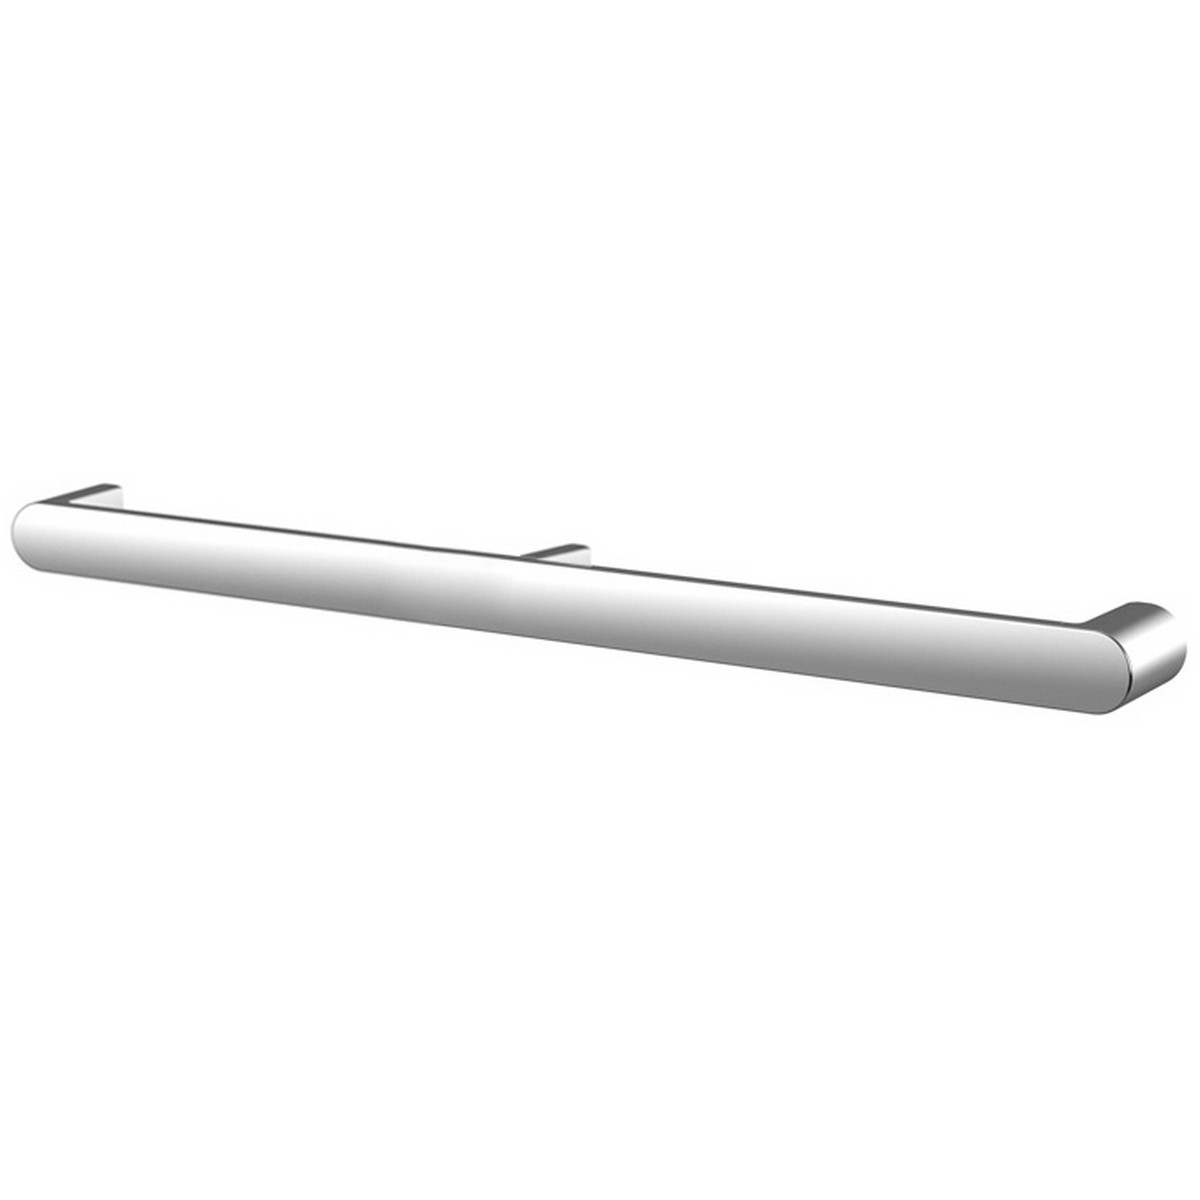 KEUCO 31601010900 ELEGANCE 36 1/2 INCH WALL MOUNTED SUPPORT RAIL IN POLISHED CHROME